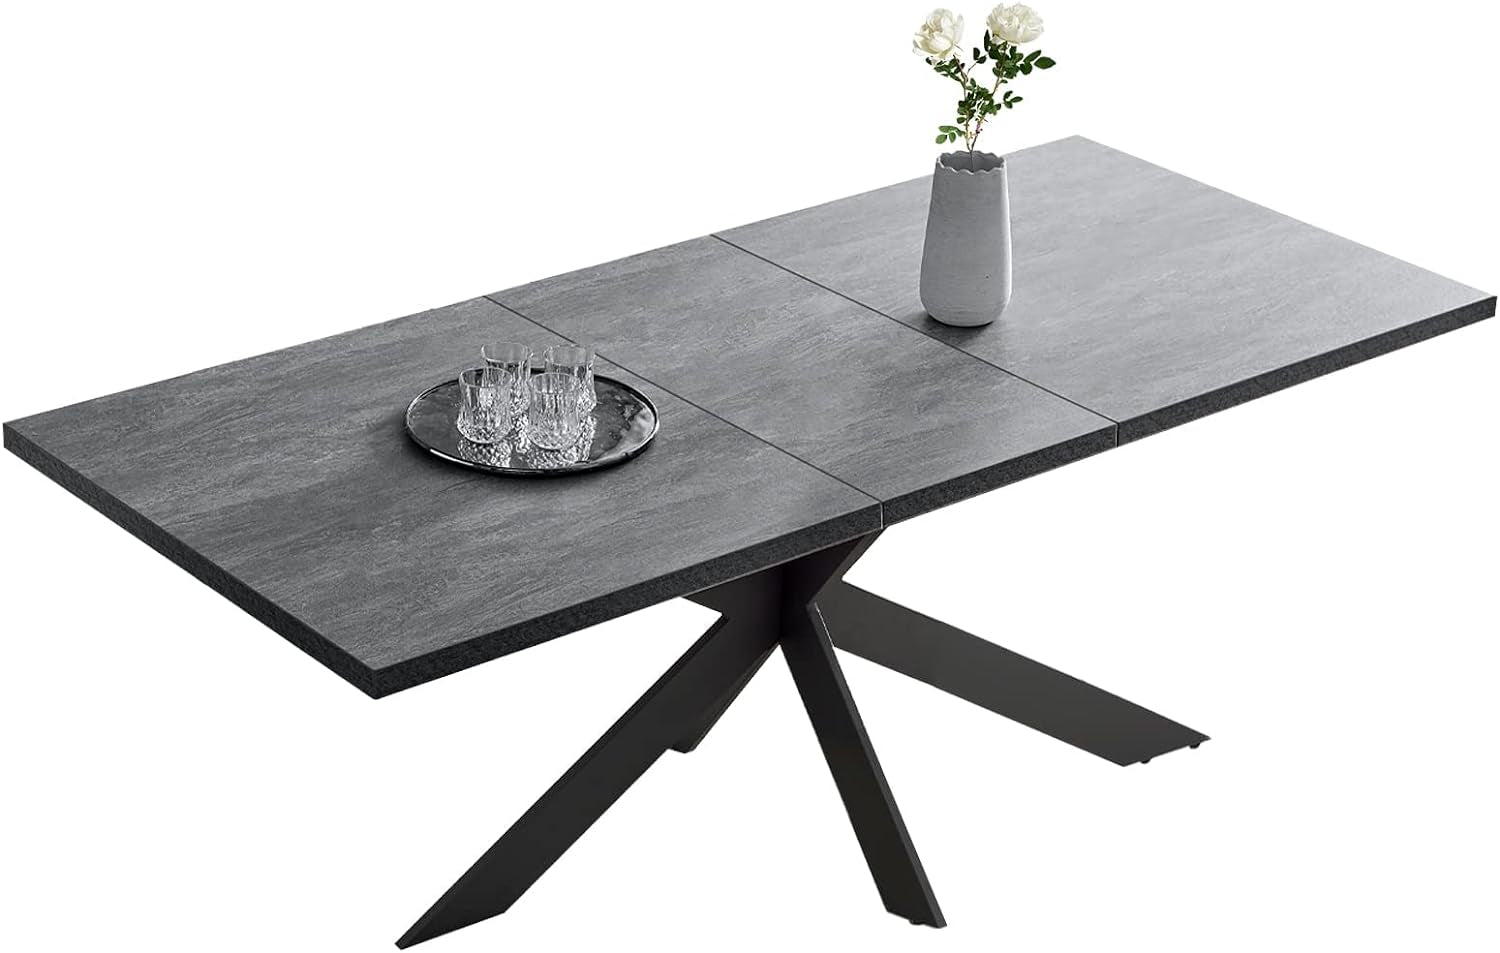 Modern Dining Table Table Set for 6-8 Person for Dining Room, Kitchen Table Set with Steel Legs